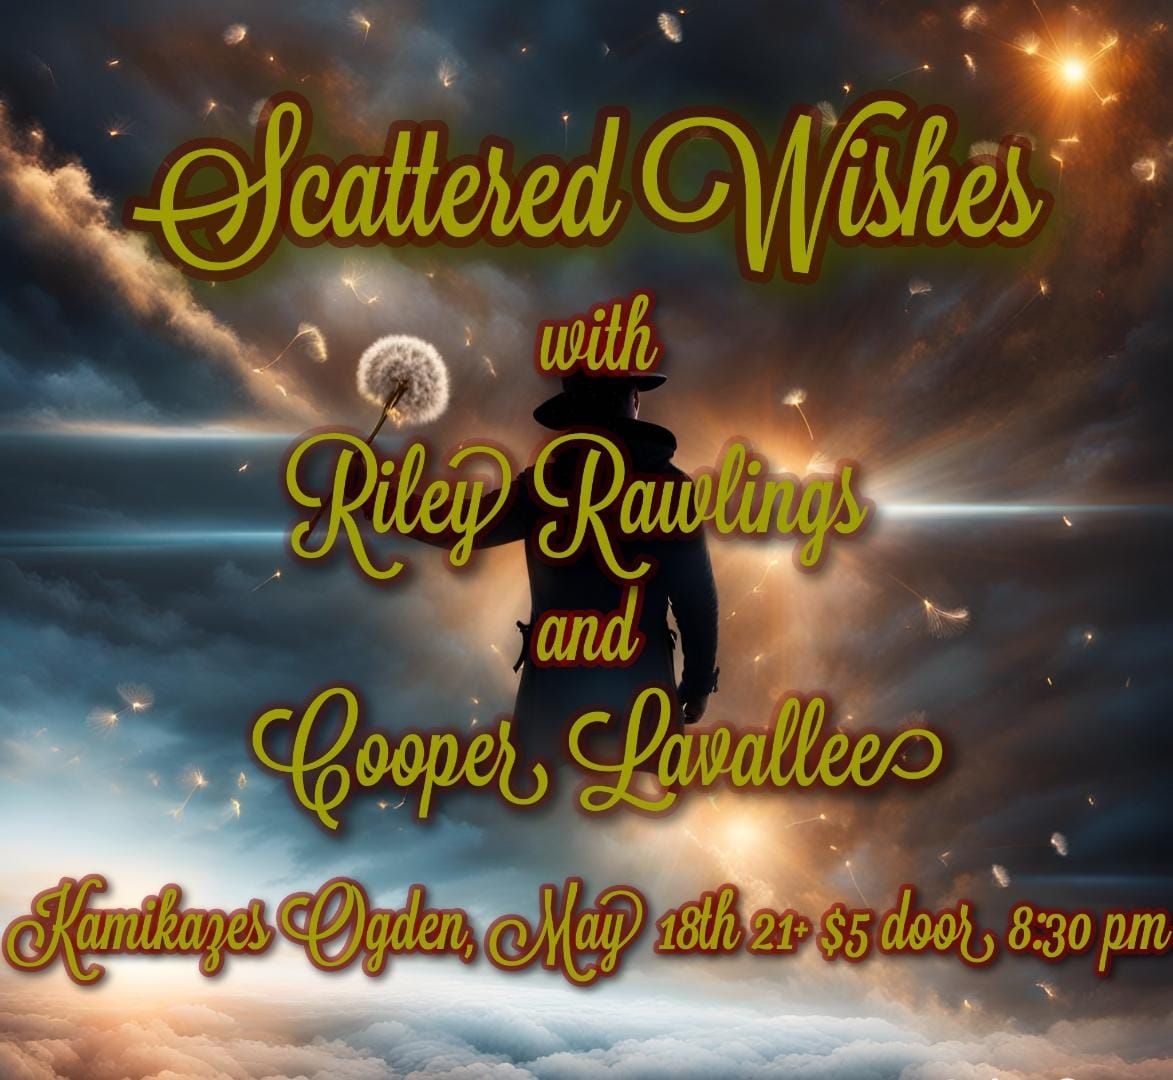 Scattered Wishes, Riley Rawlings' Band and Cooper Lavalee